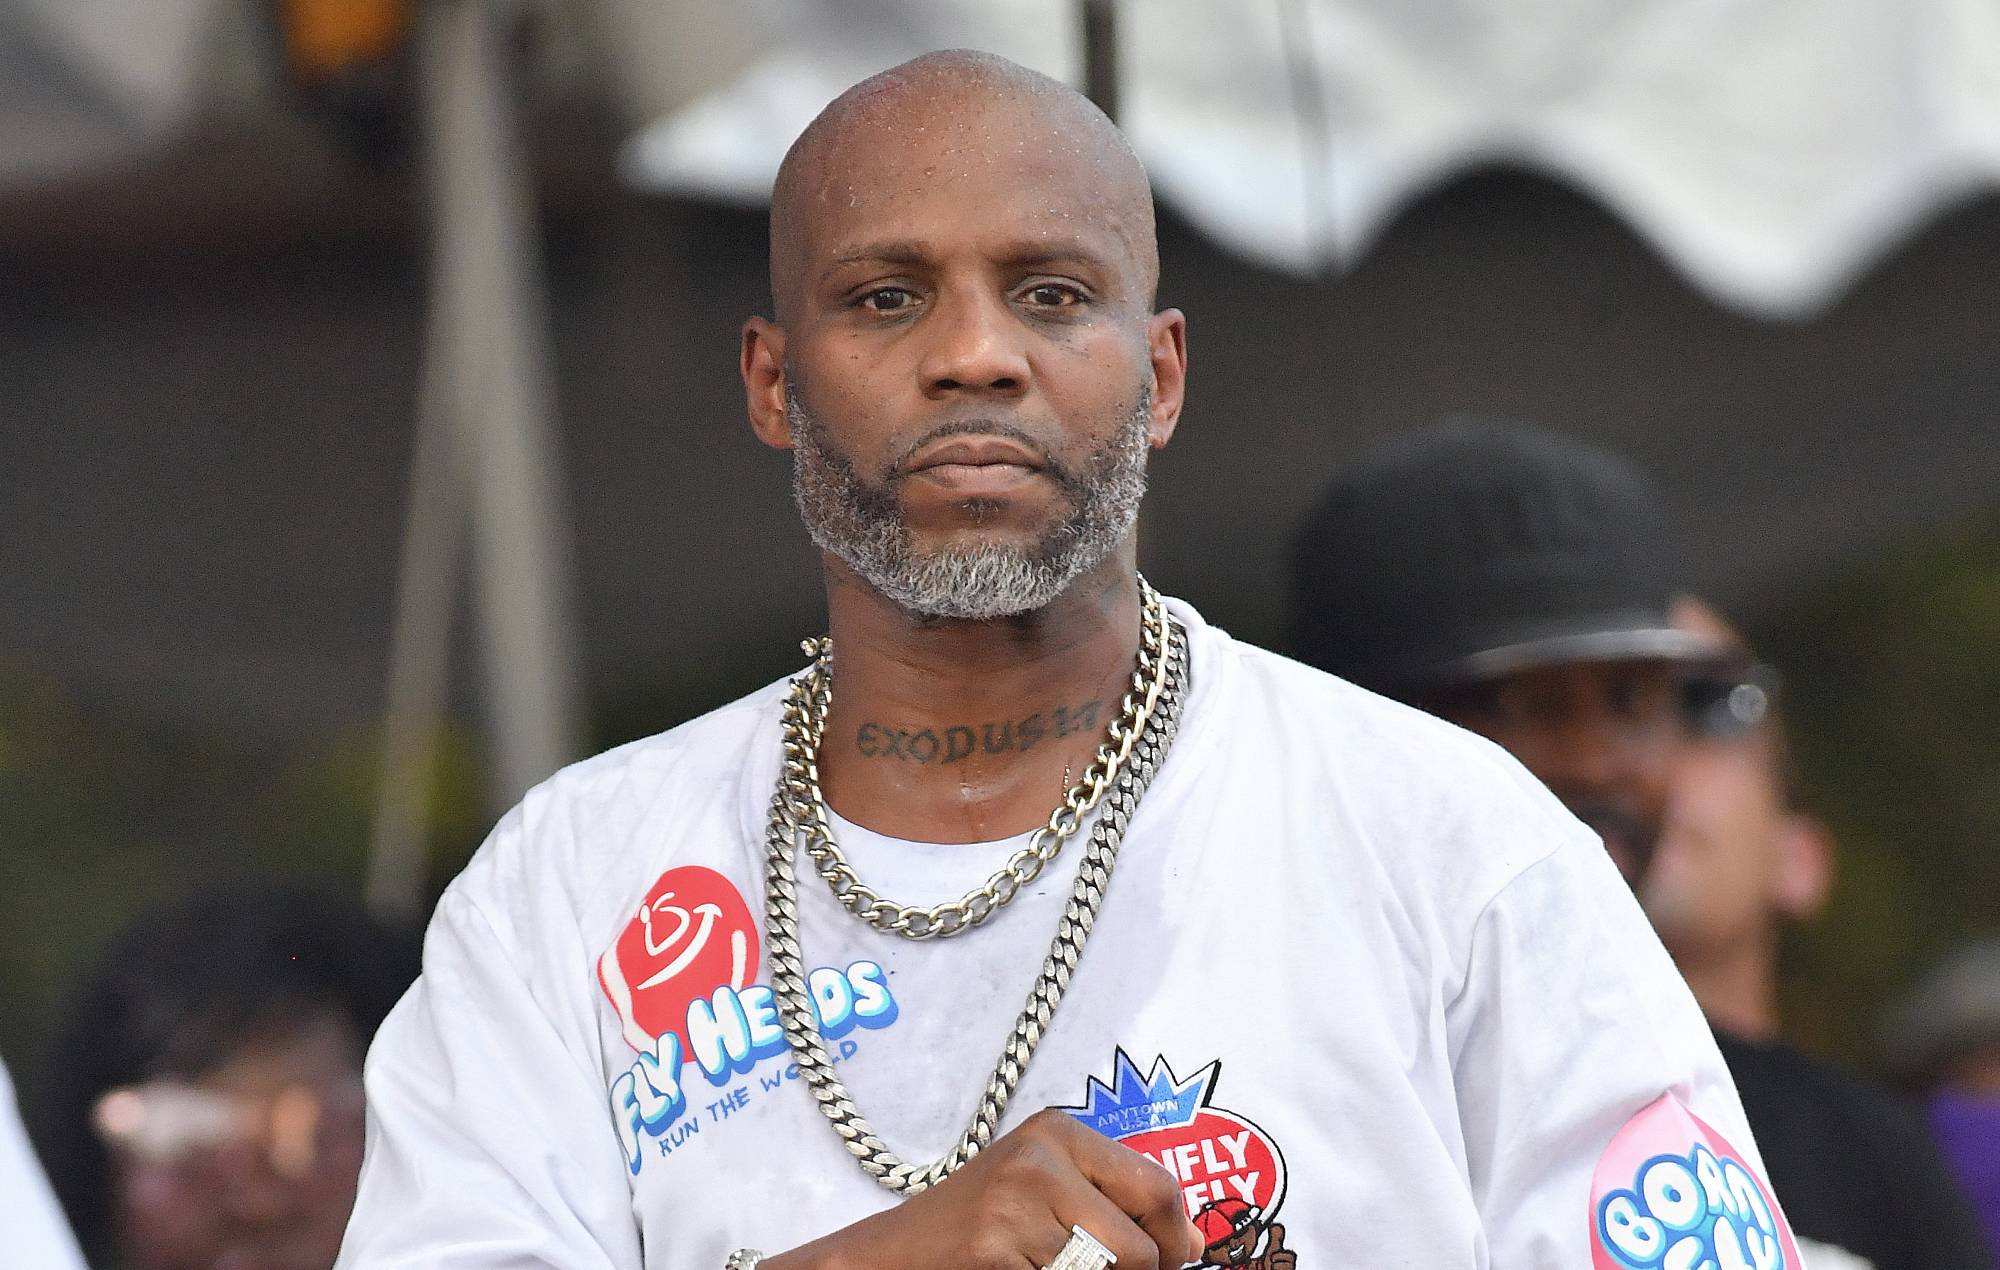 THE OFFICIAL CAUSE OF DEATH OF DMX HAS BEEN REVEALED